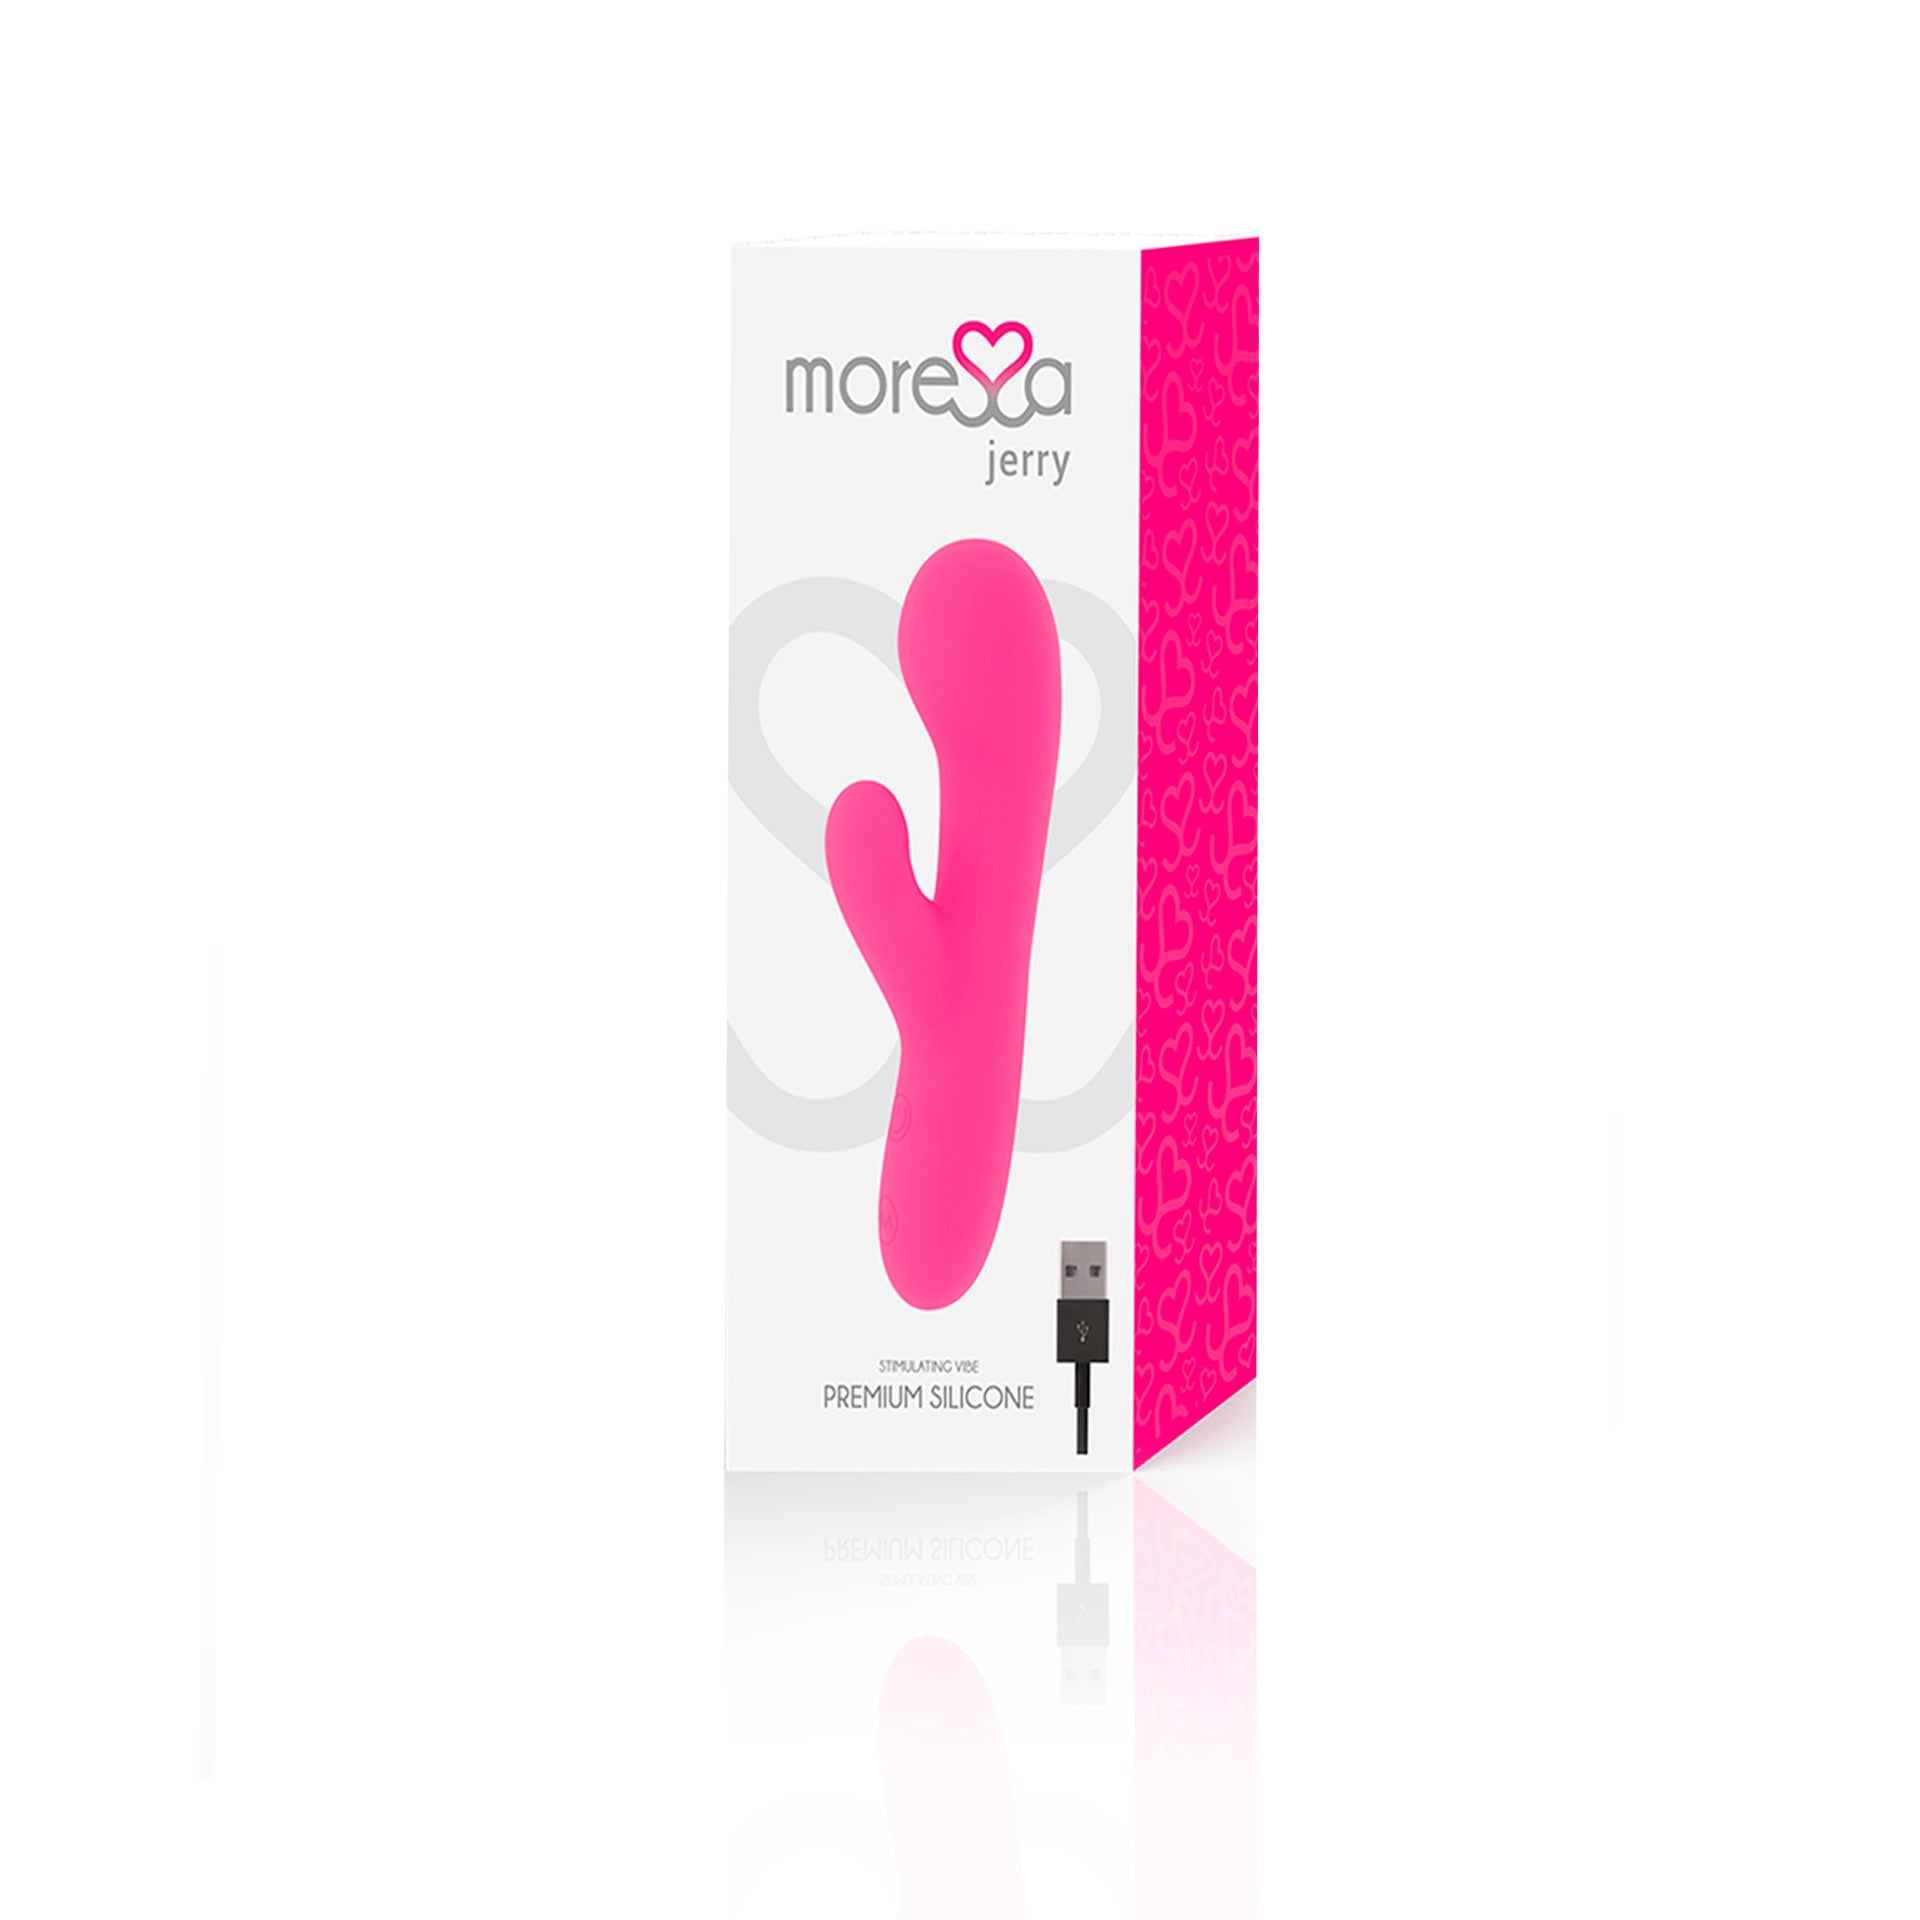 Moressa Jerry Premium Silicone rechargeable